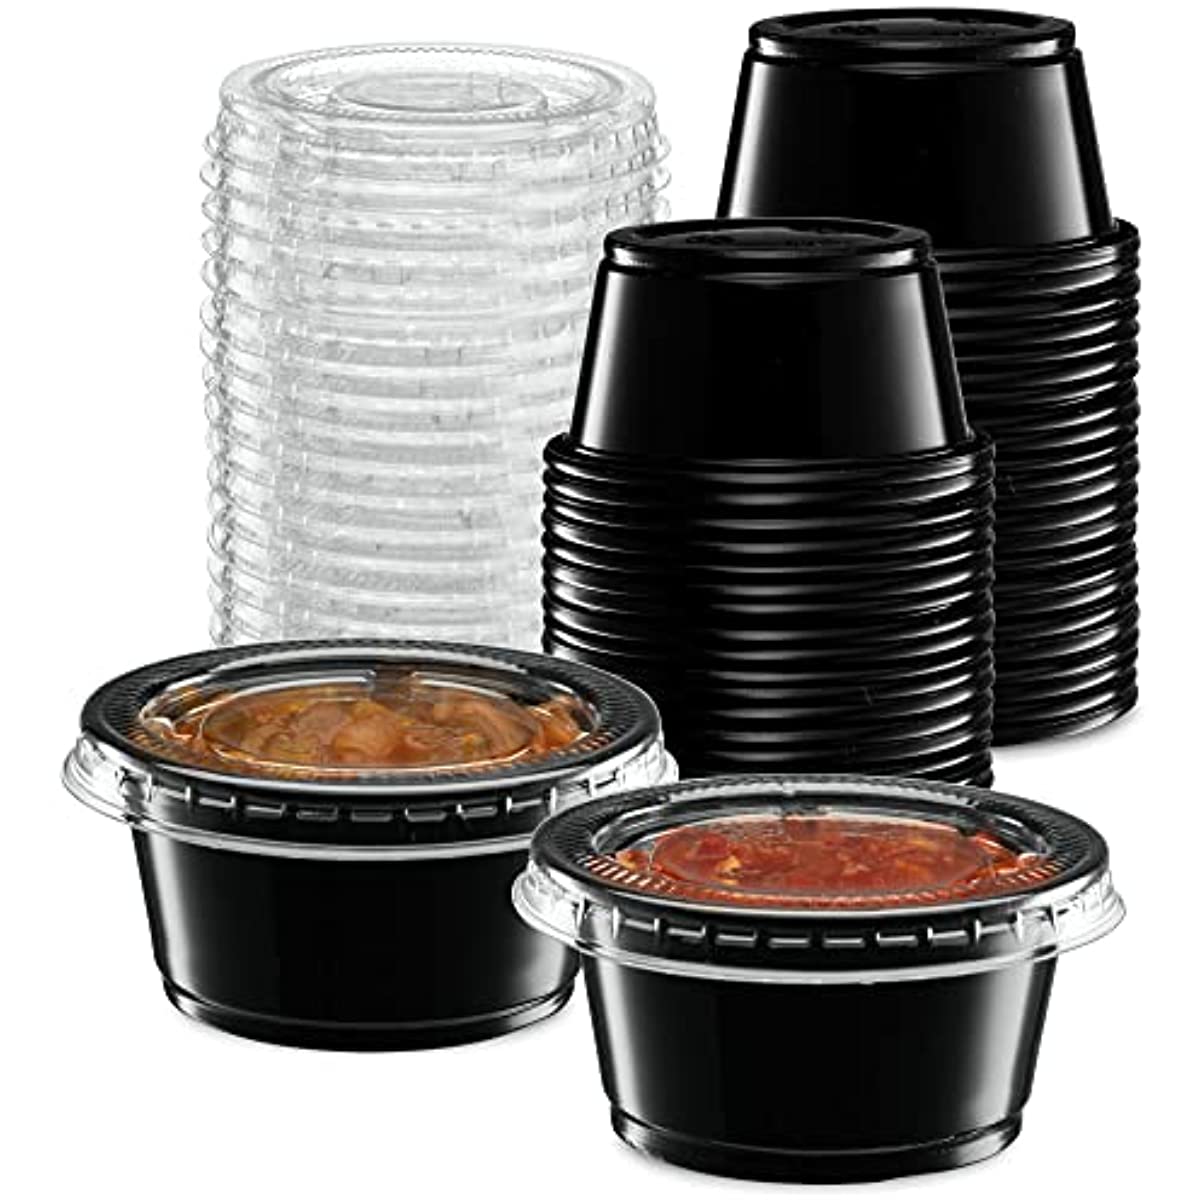  [130 Sets - 2 Oz ] Black Plastic Portion Cups, Jello Shot Cups,  Small Plastic Containers with Lids, Airtight Salad Dressing Container,  Dipping Sauce Cups, Condiment Cups for Lunch, Party to